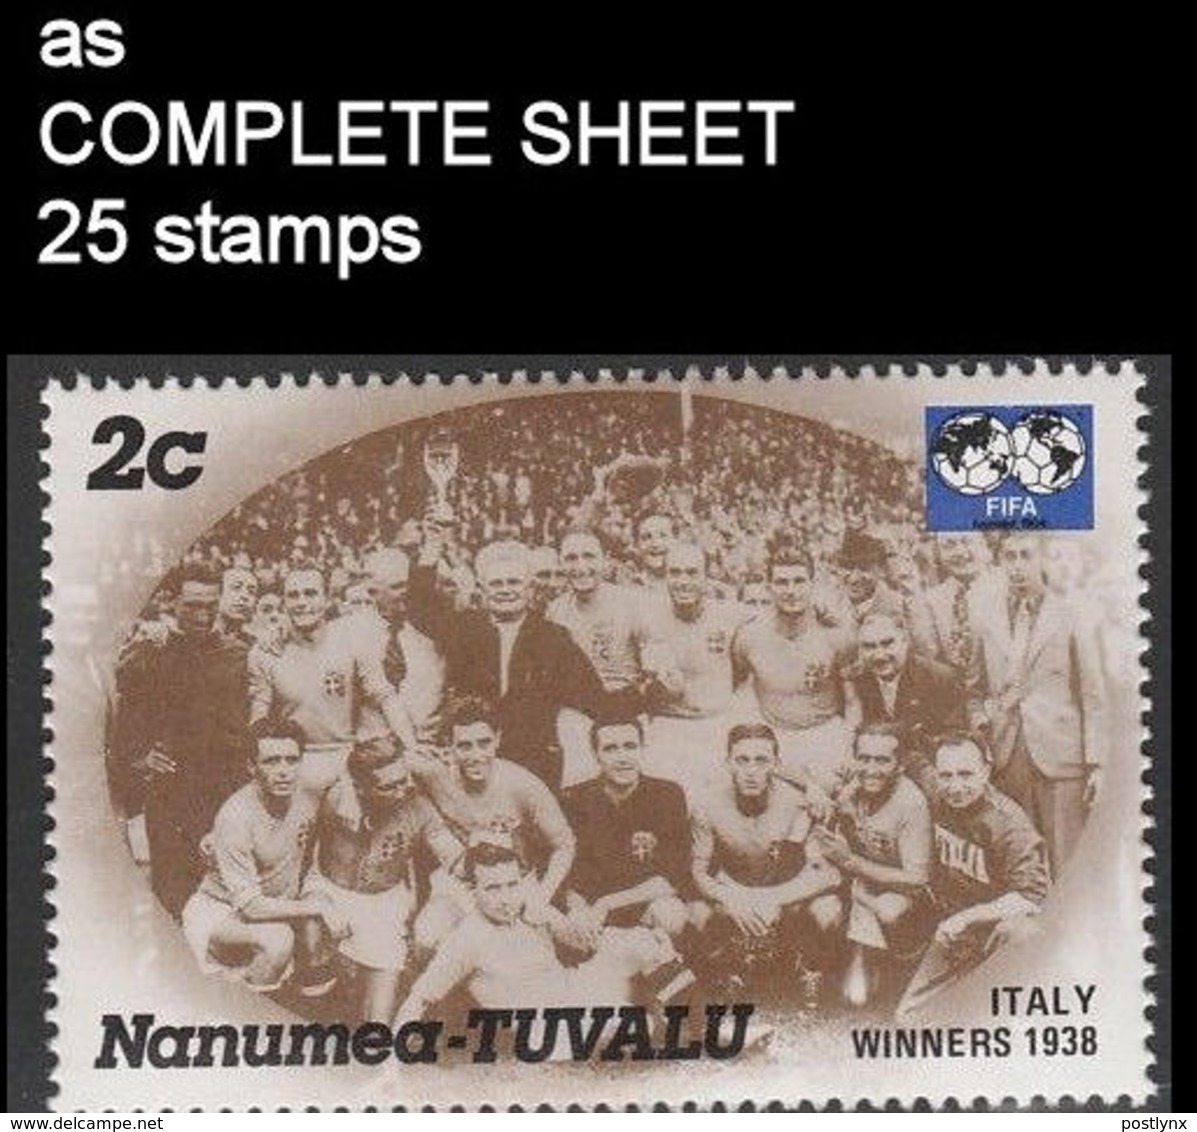 CV:€5.56 TUVALU-Nanumea 1986 World Cup Mexico France Winner Italy 1938 2c COMPLETE SHEET:25 Stamps - 1938 – France